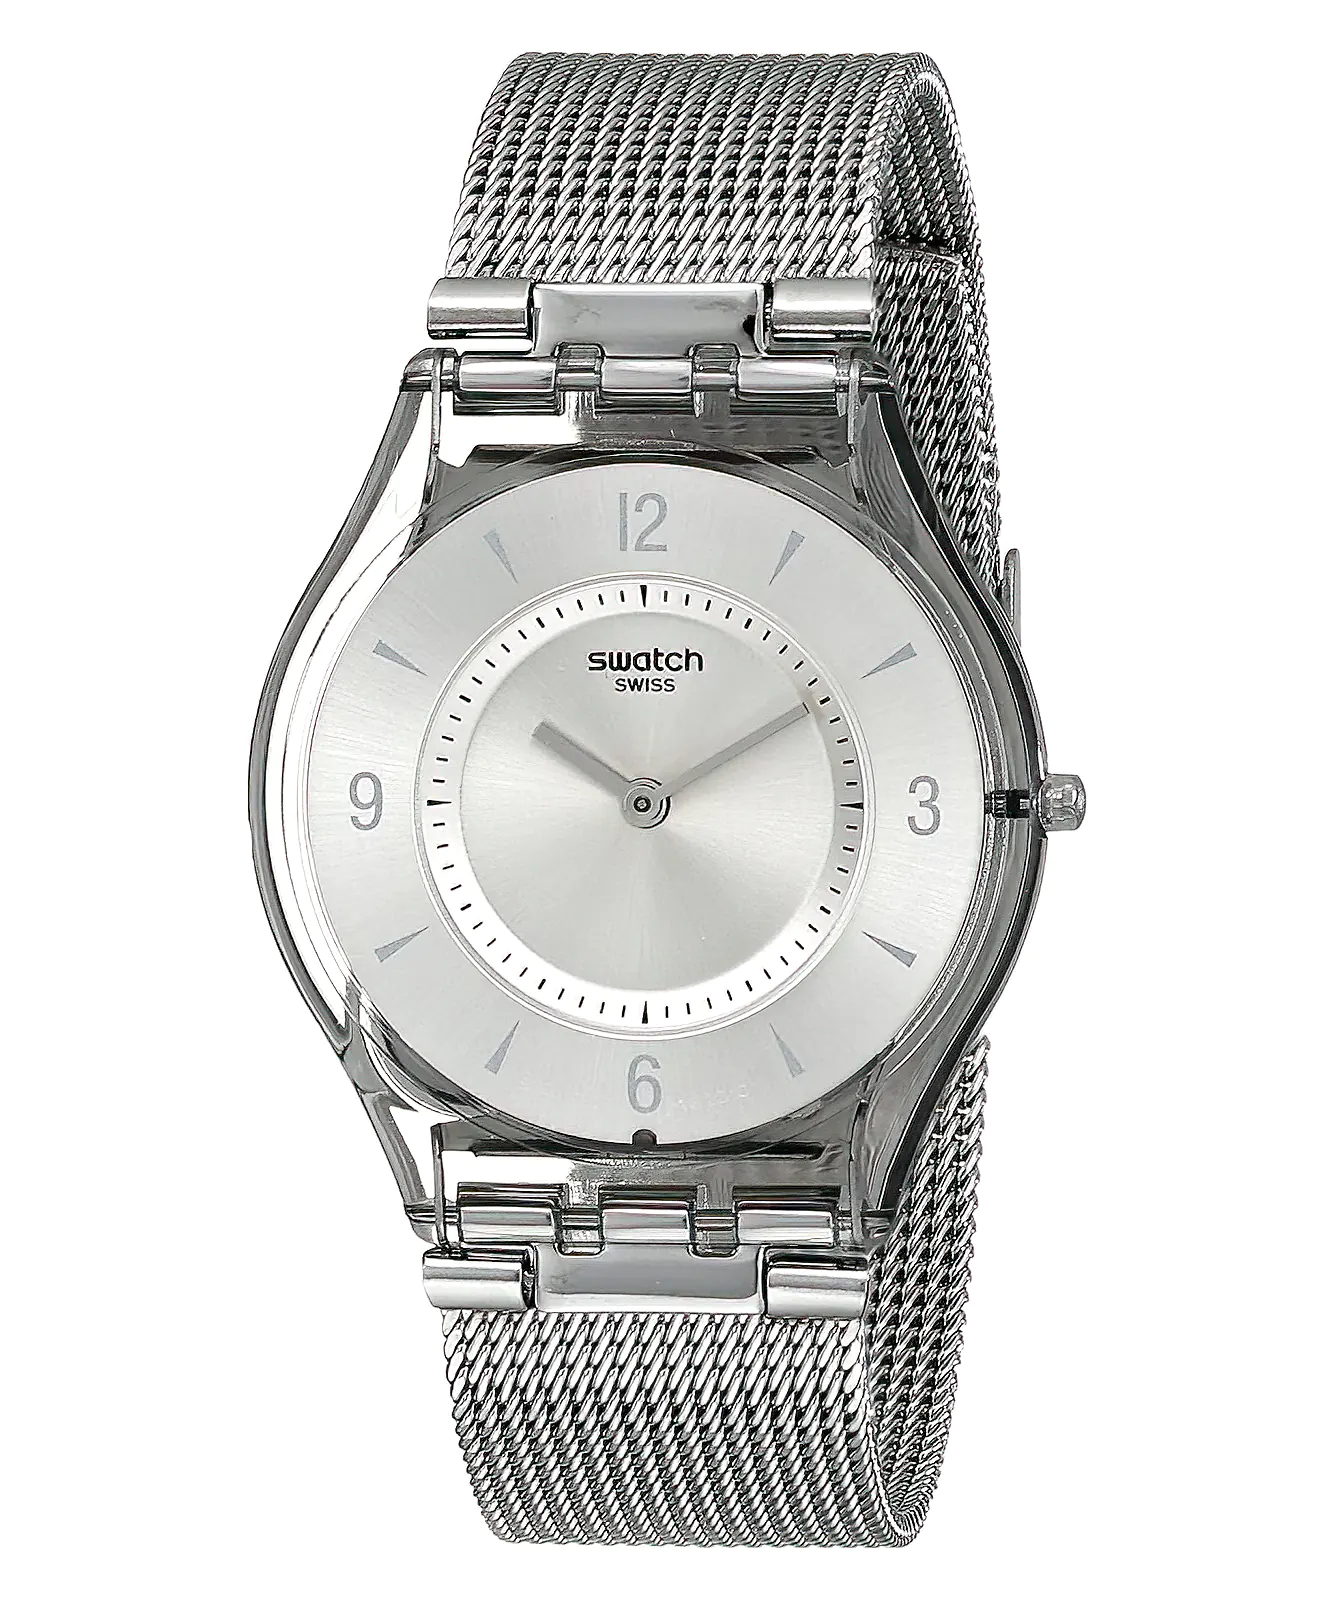 swatch sfm118m stainless steel casual watch